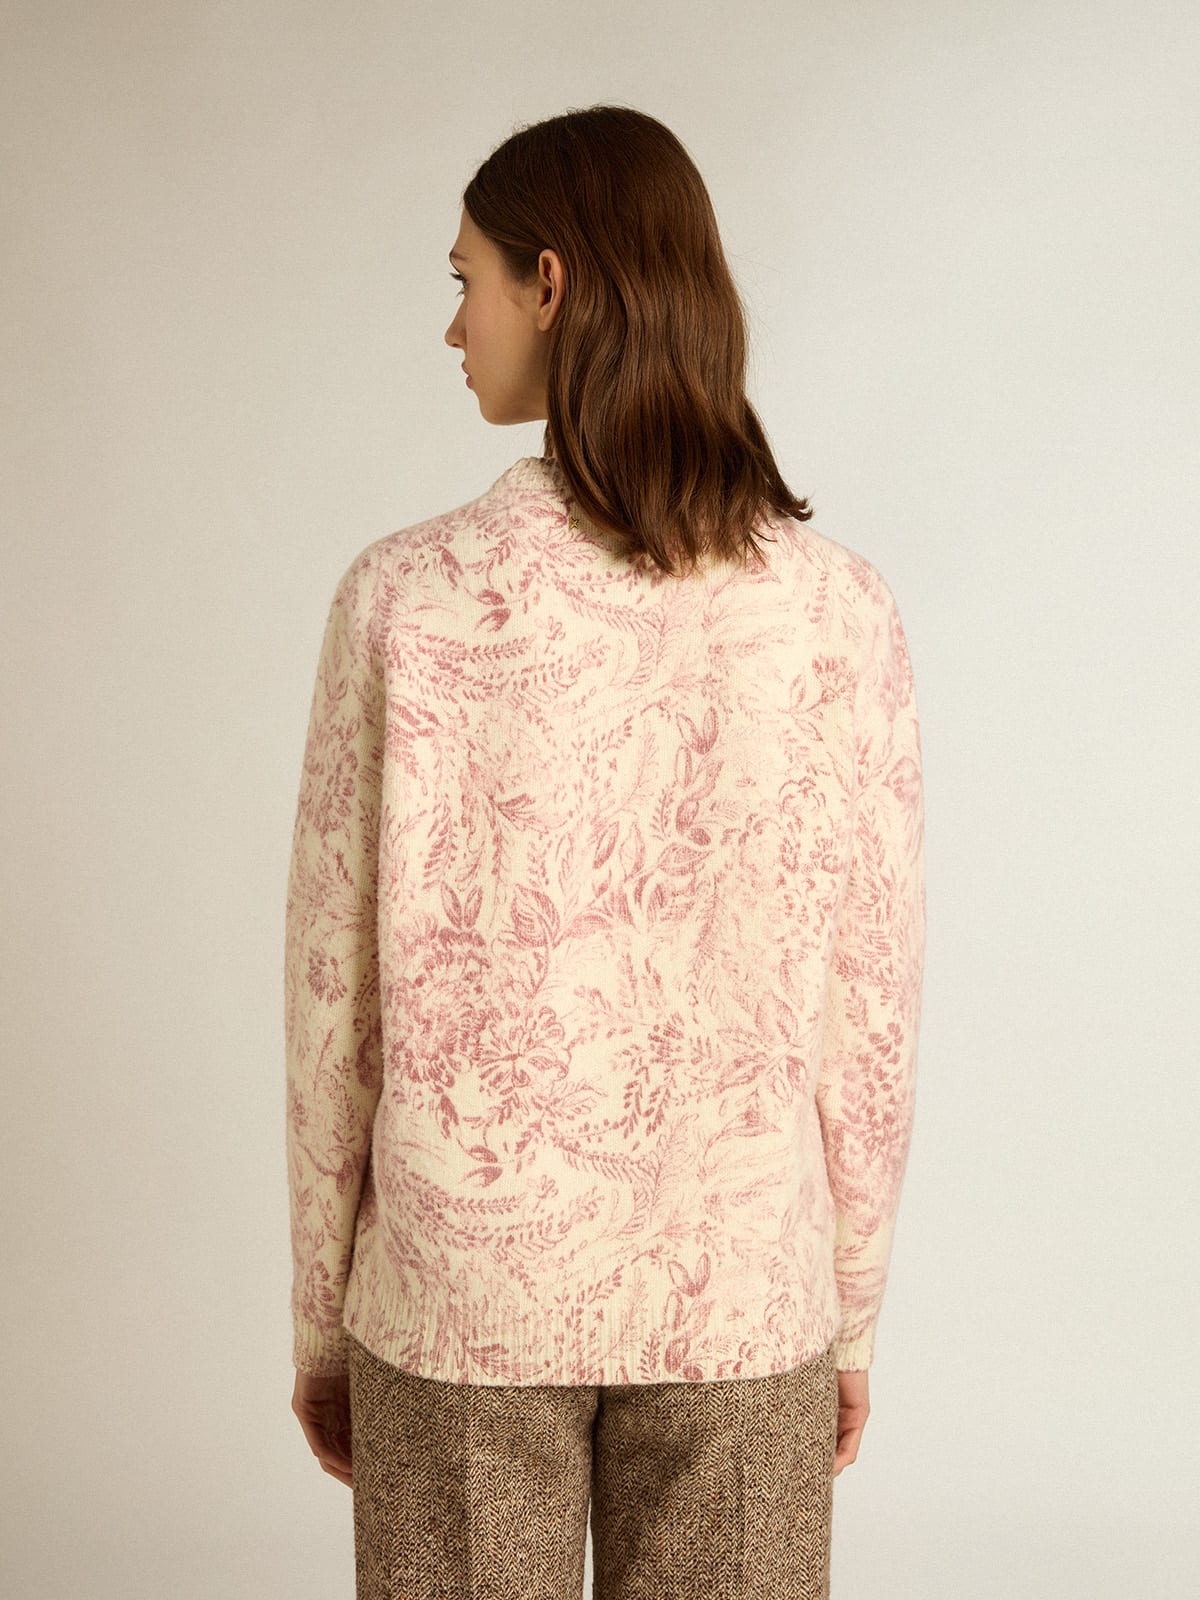 Golden Goose - Women’s round-neck sweater in wool with all-over toile de jouy pattern in 